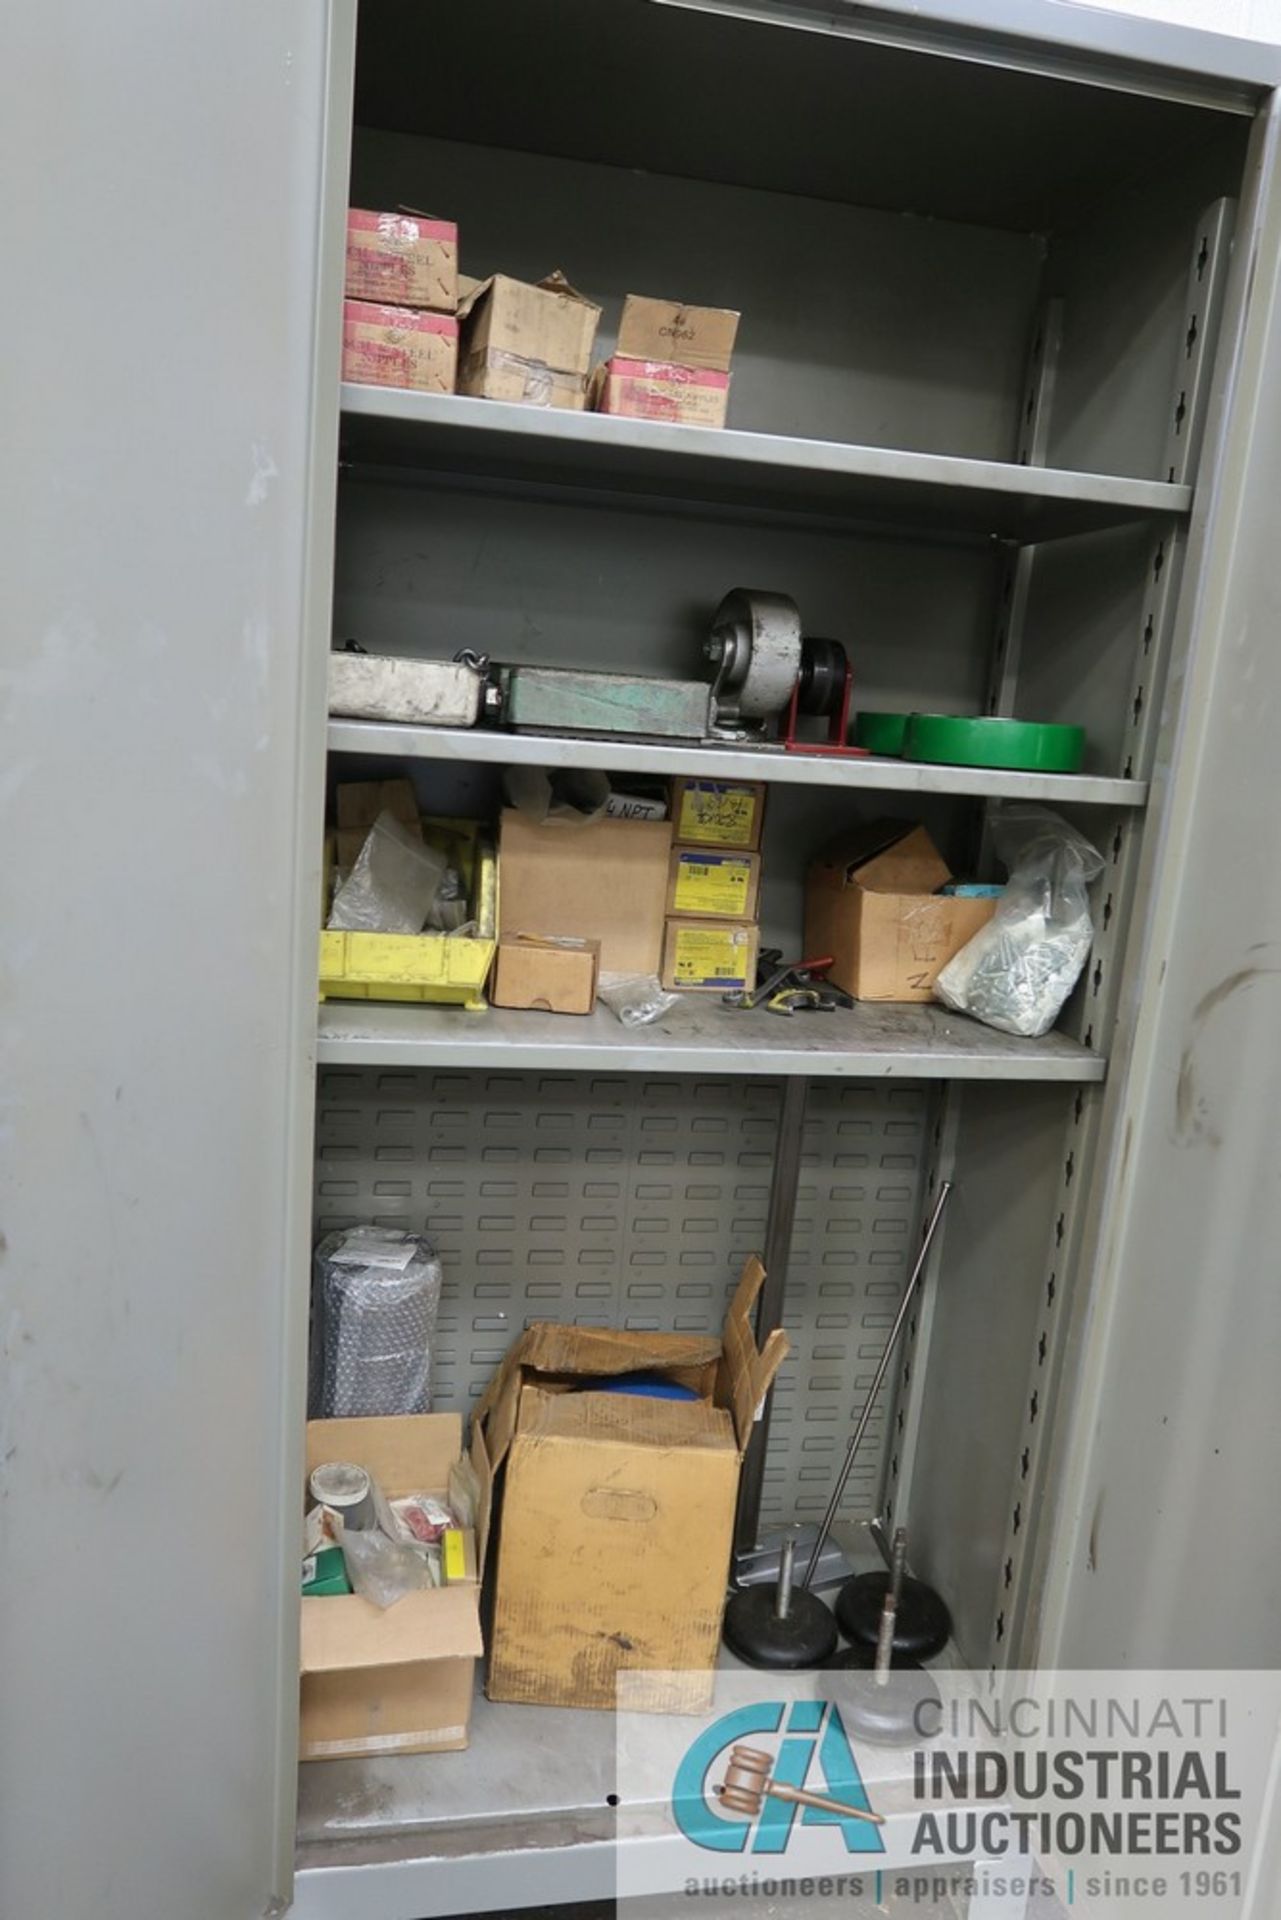 (LOT) MISCELLANEOUS SHOP SUPPLIES AND HARDWARE WITH LYON STORAGE CABINET - Image 2 of 5